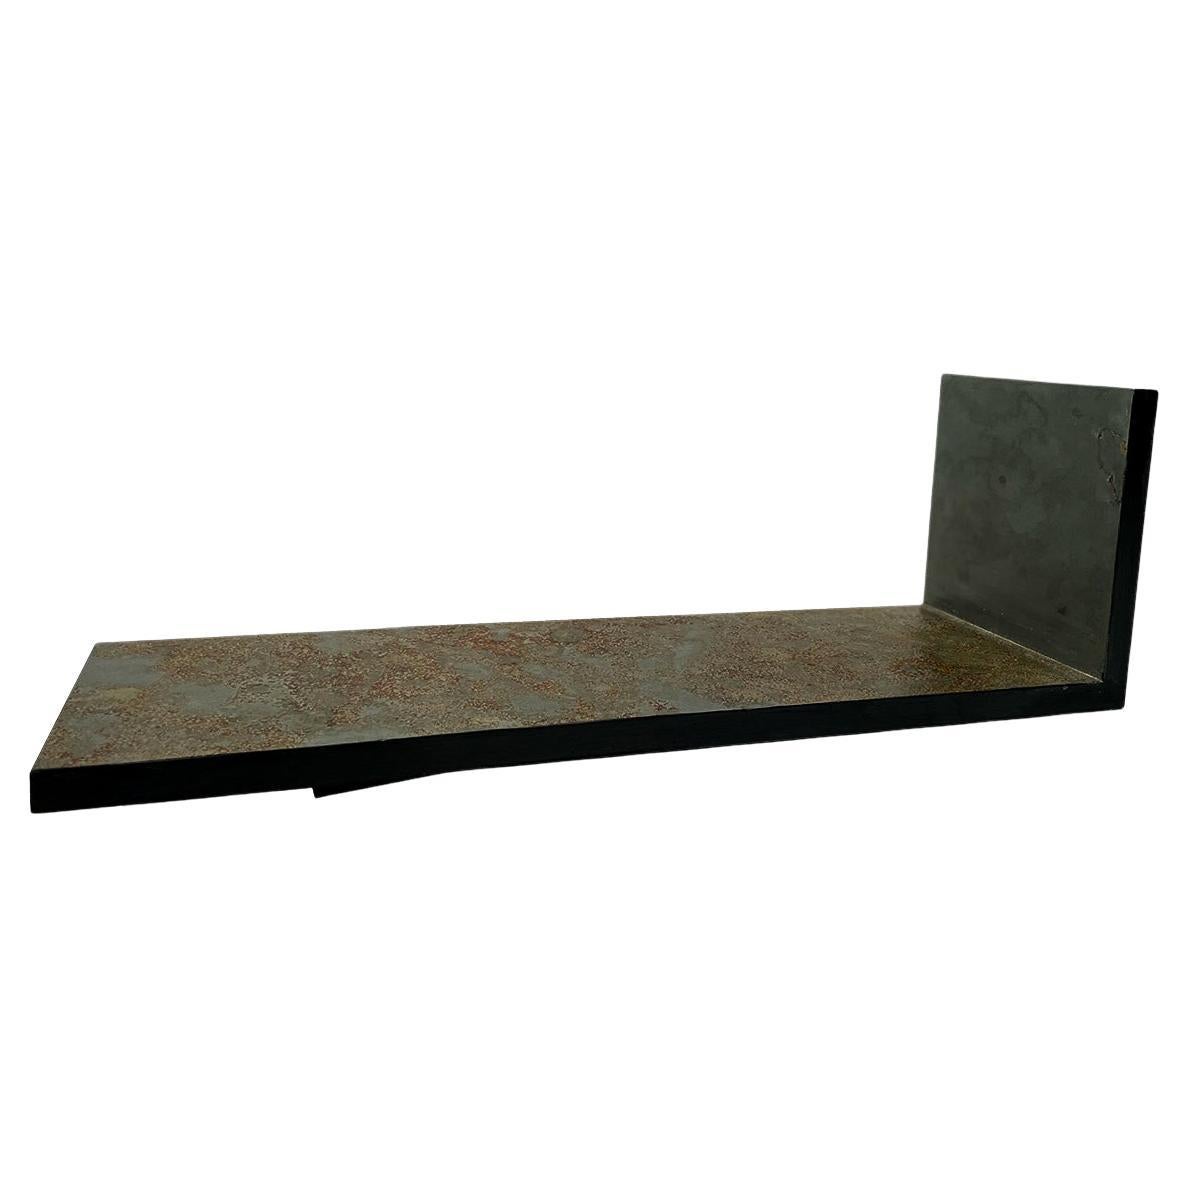 Oxid Slate Bookend Natural Stone Contemporary Design by Joaquín Moll In Stock For Sale